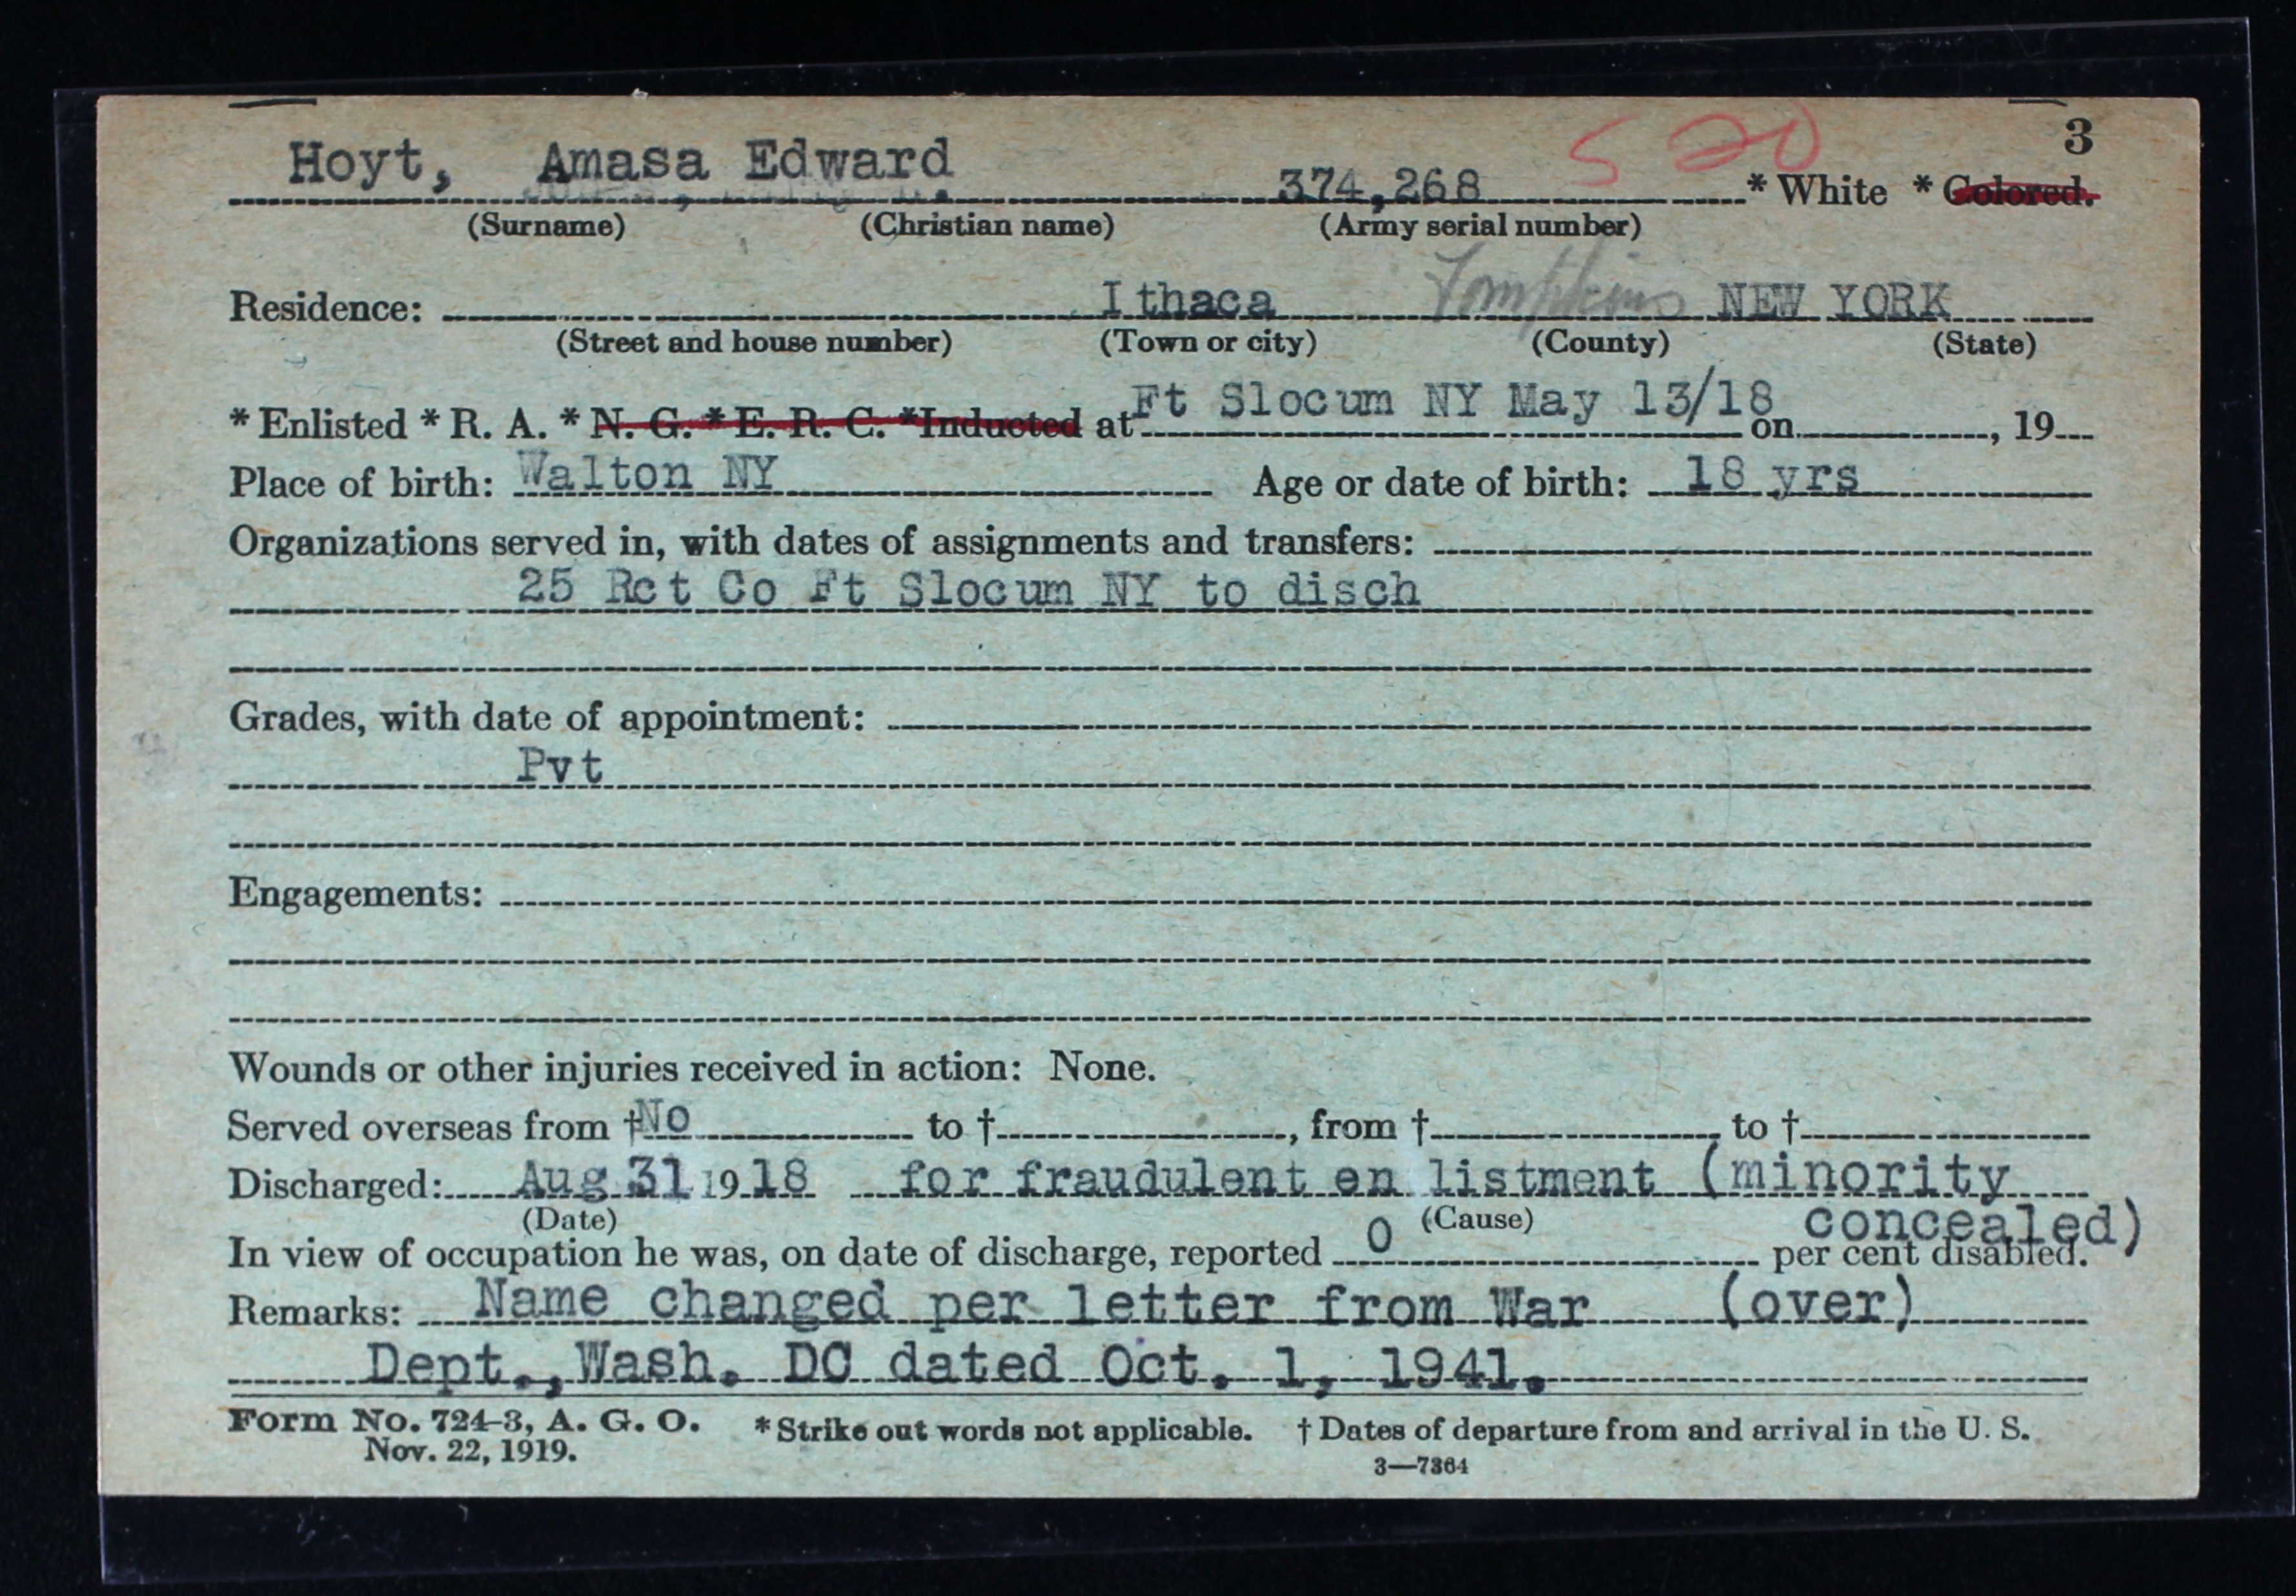 Abstract of WWI Military Service for Amasa Hoyt, Jr.